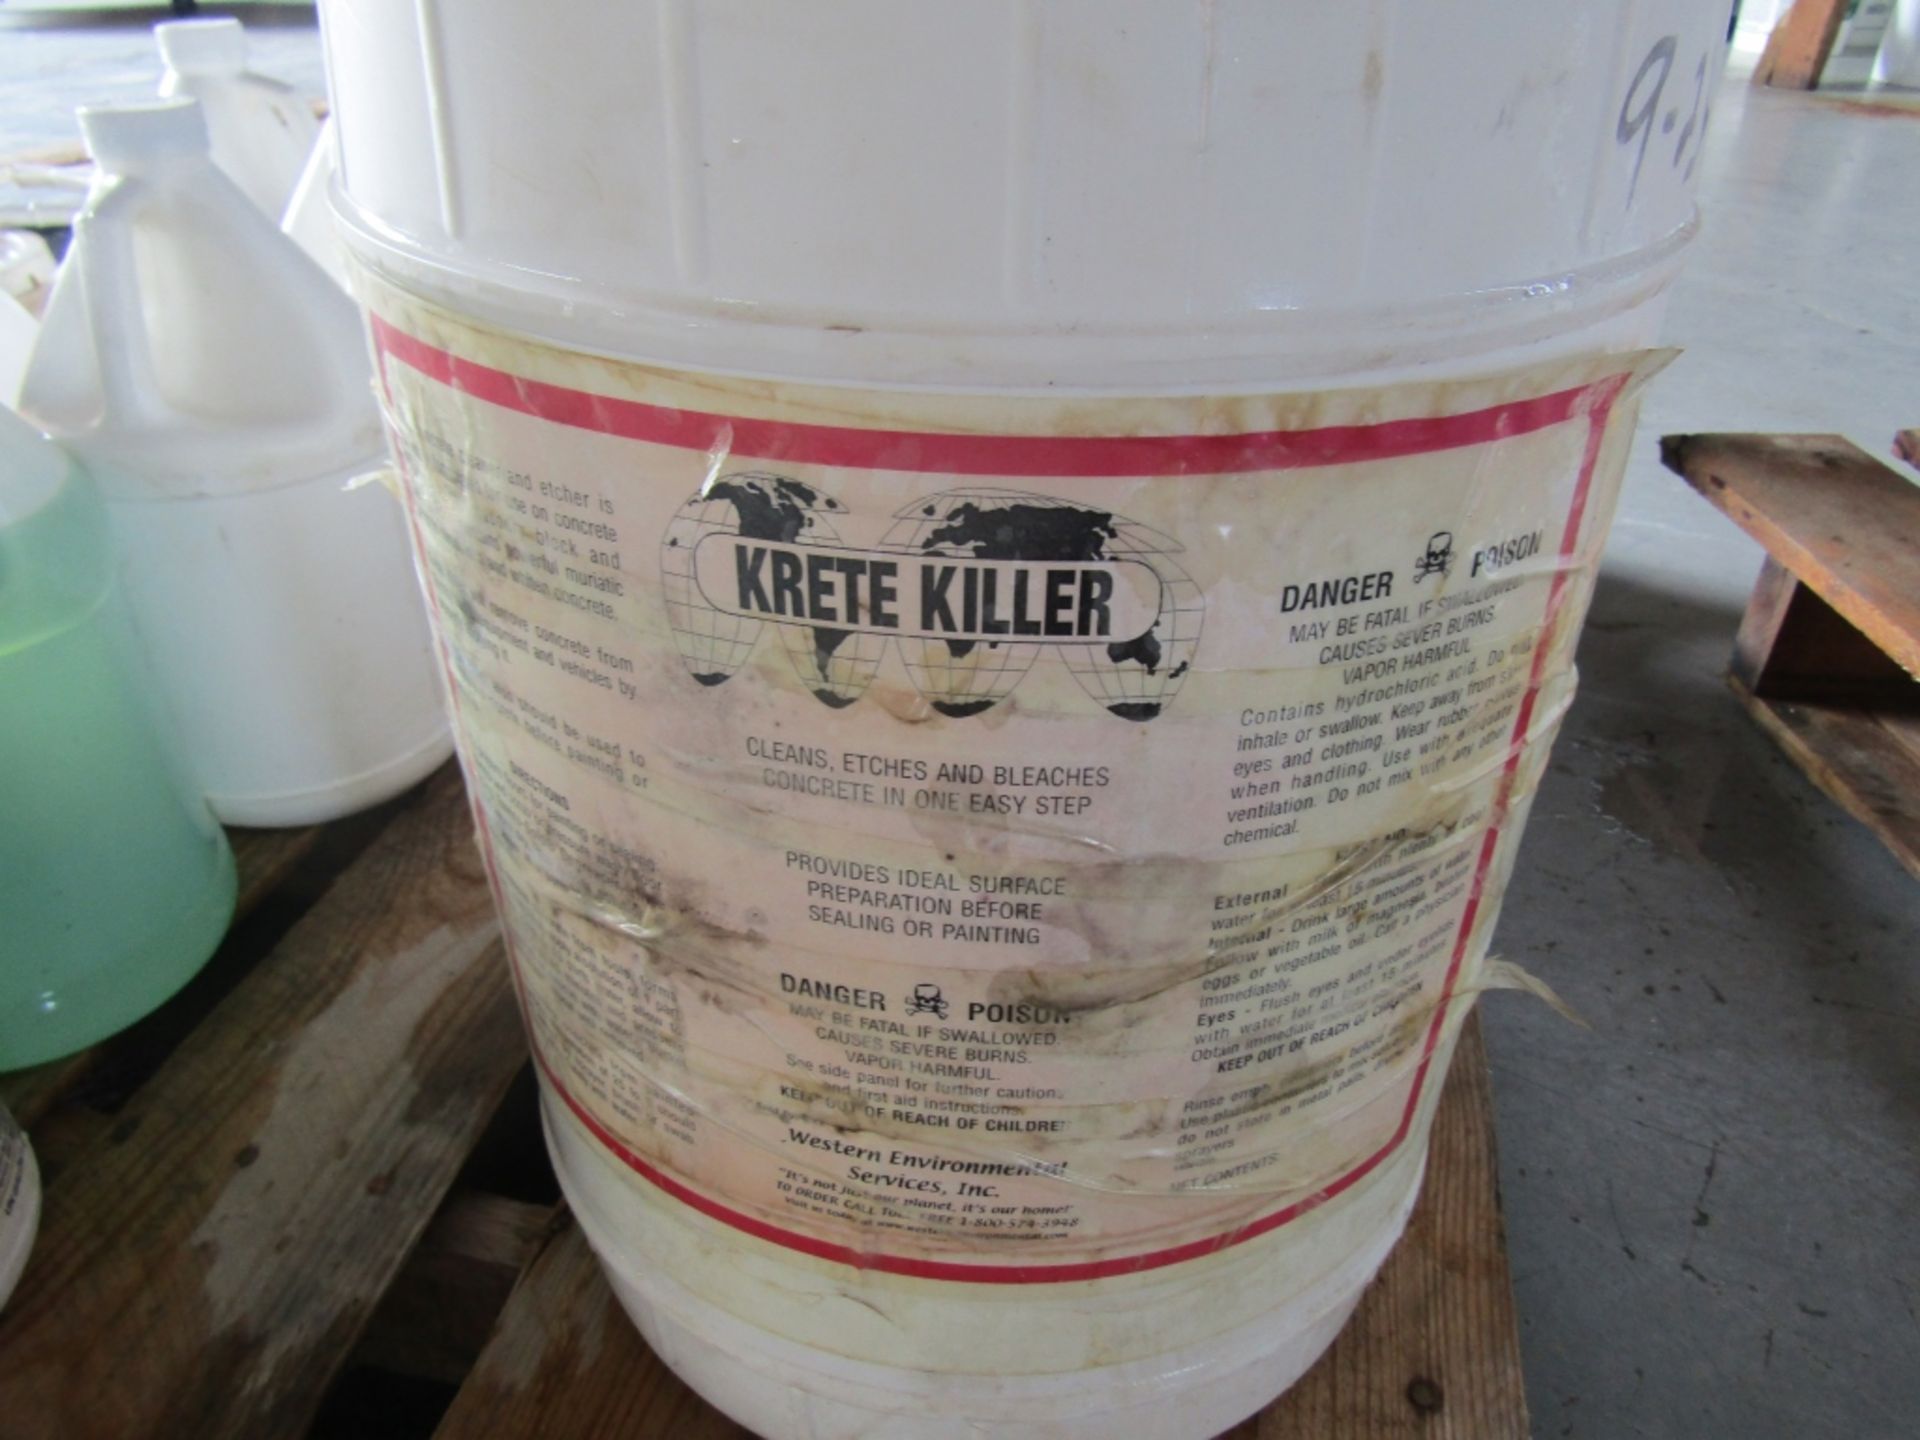 Bucket Krete Killer, Cleans, Etches & Bleaches Concrete in One Easy Step